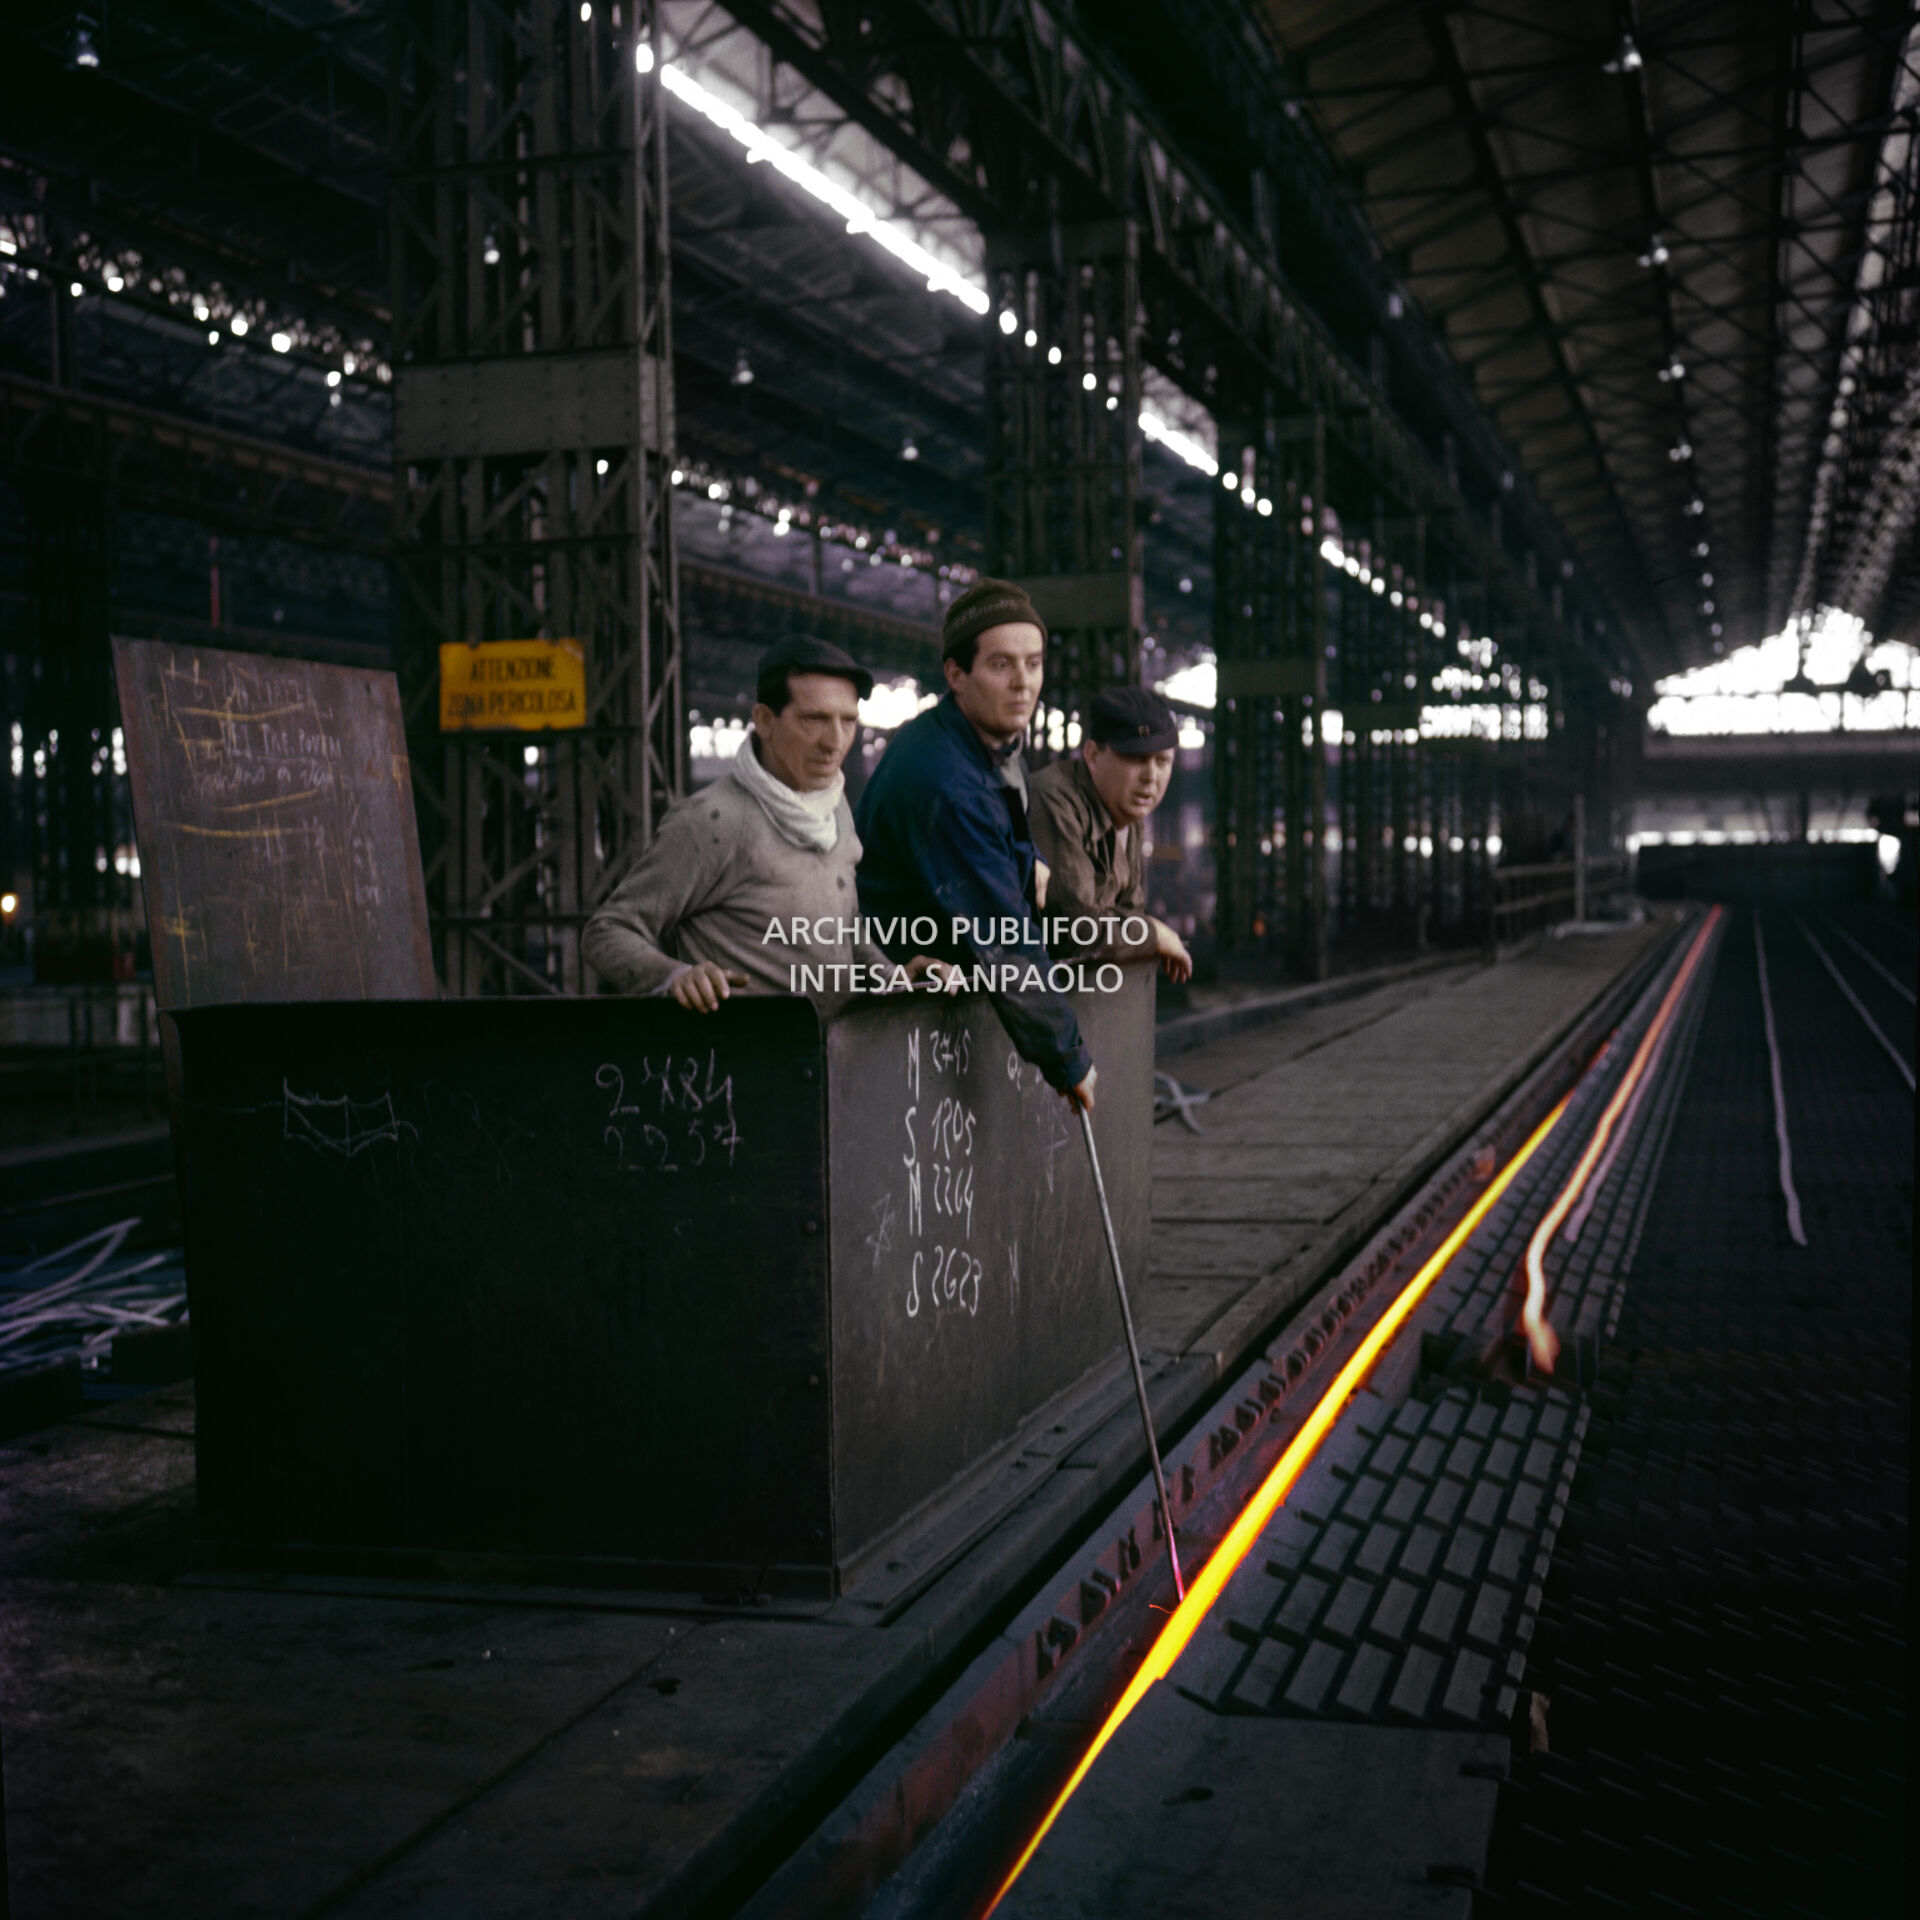 Workers in the Finsider iron and steel plant